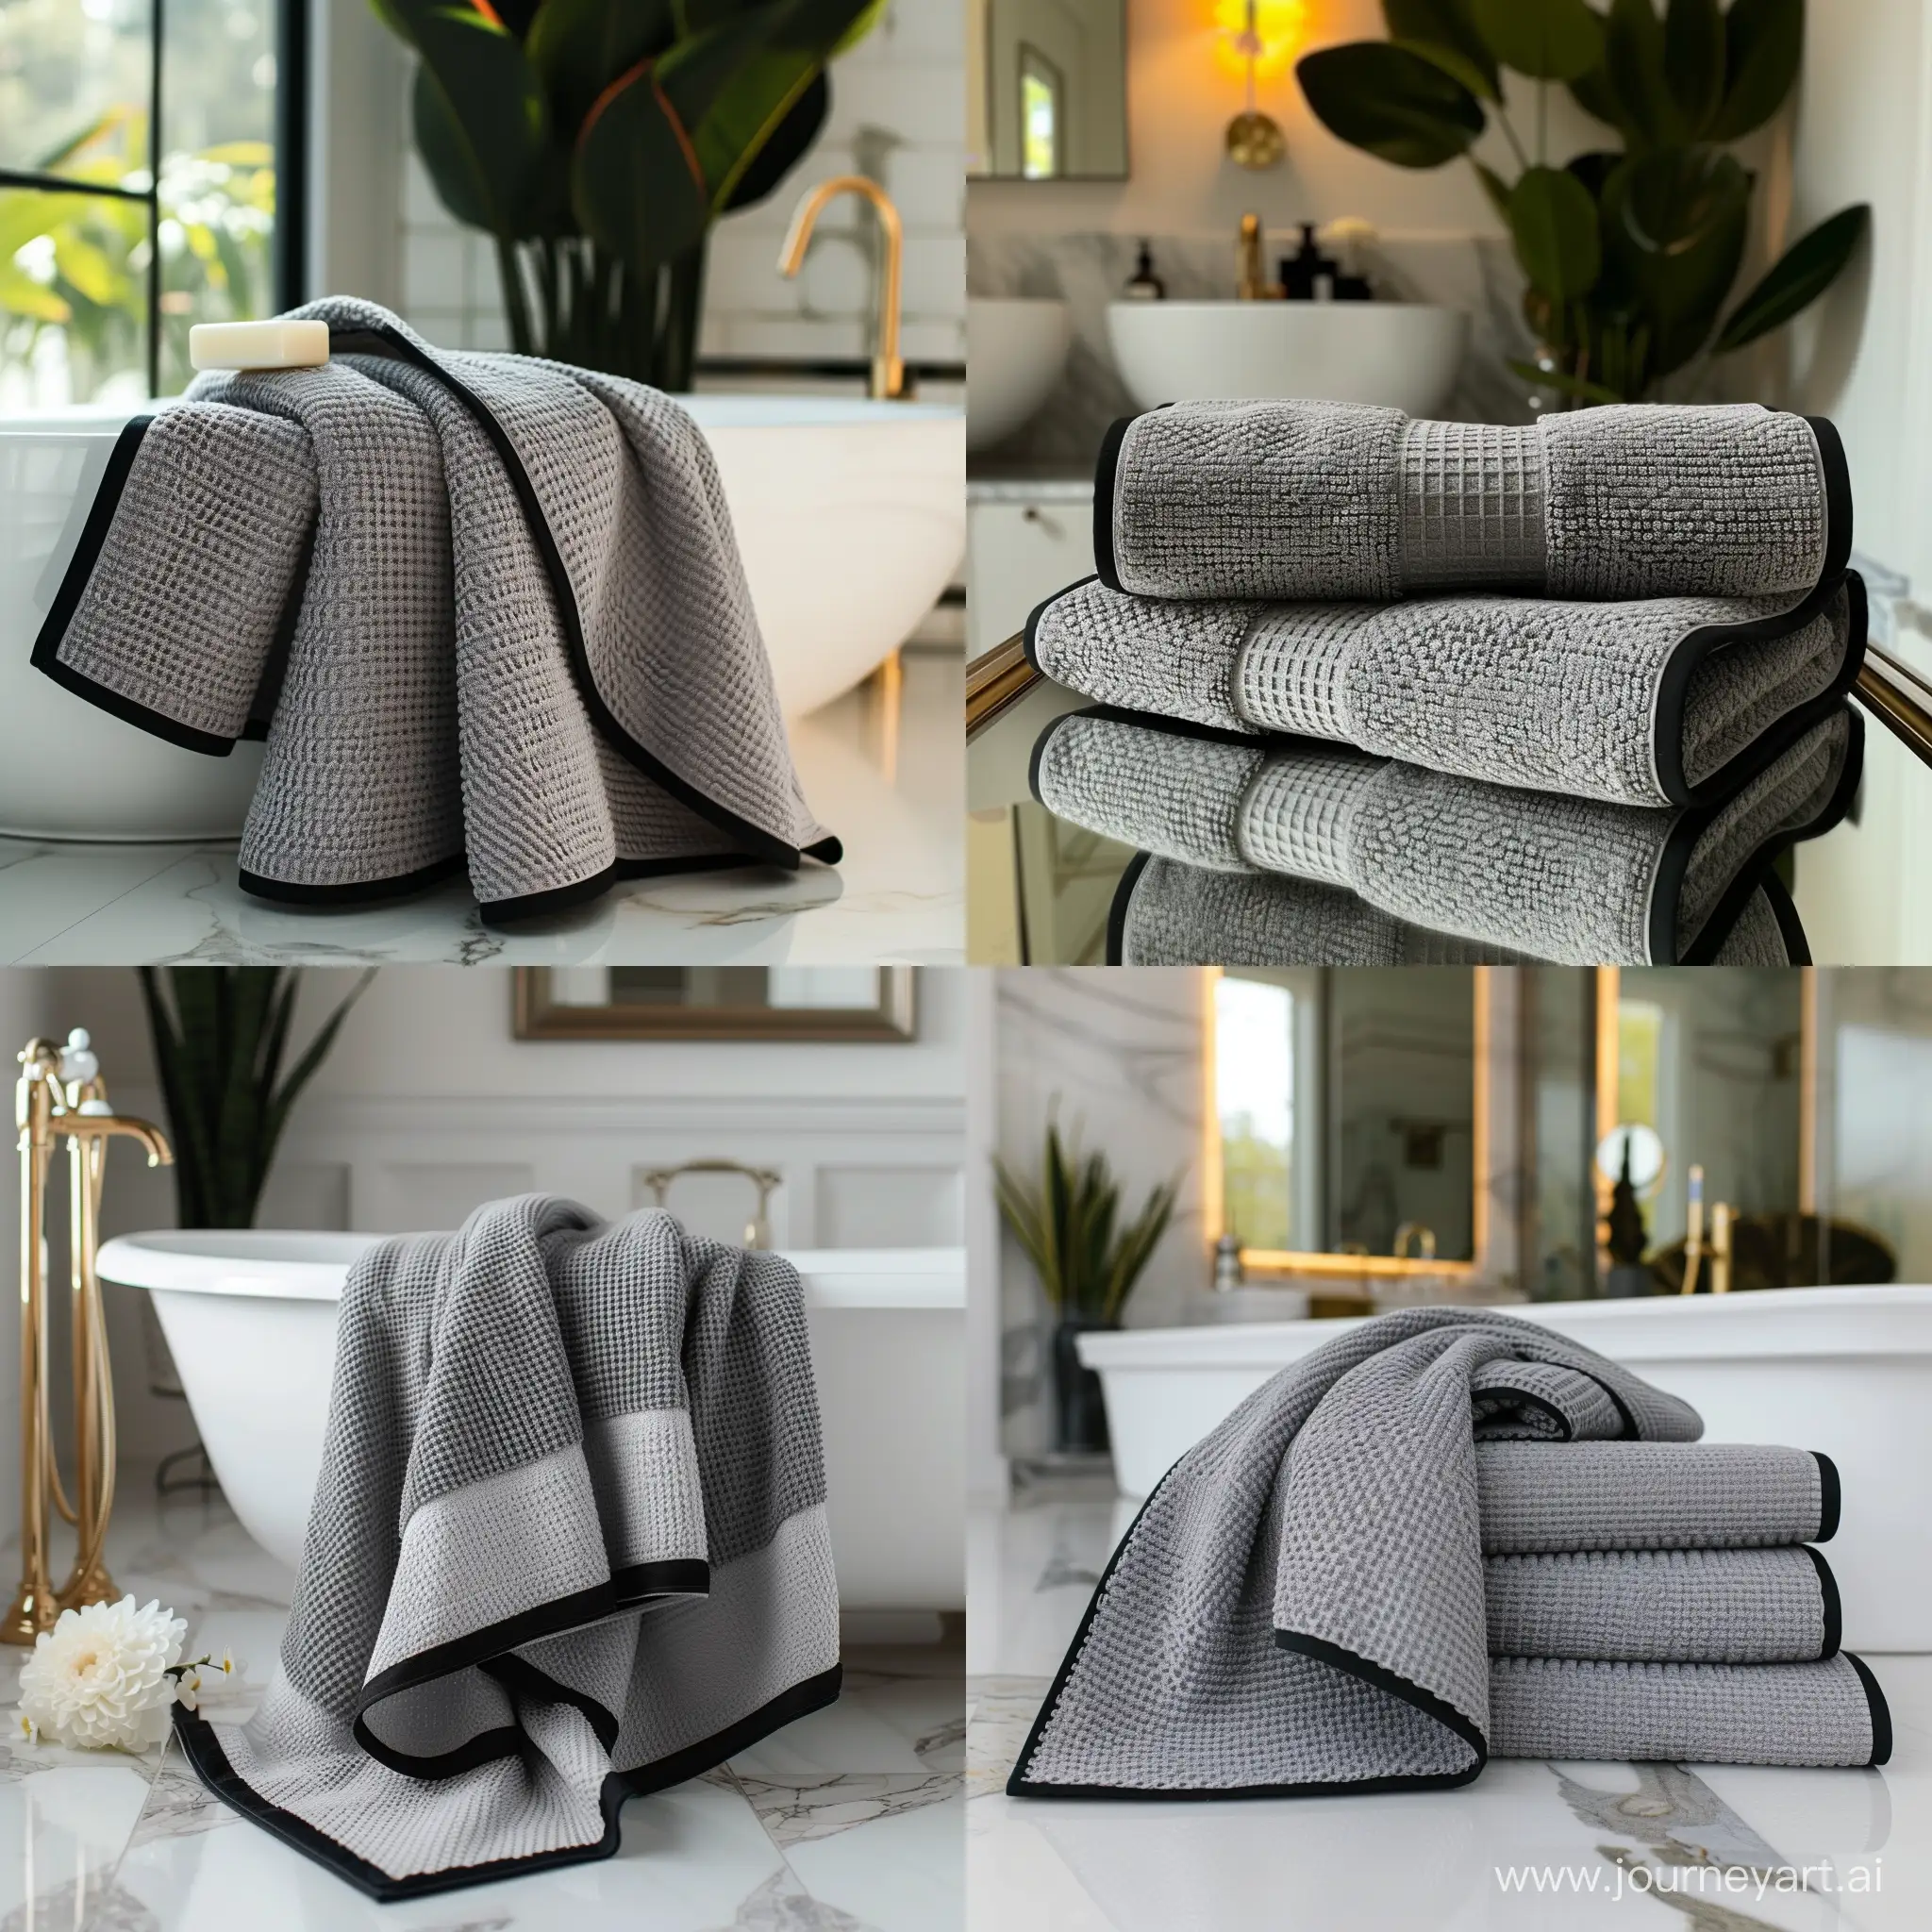 Luxurious Gray Waffle Bath Towels with Black Borders in Elegant Bright .